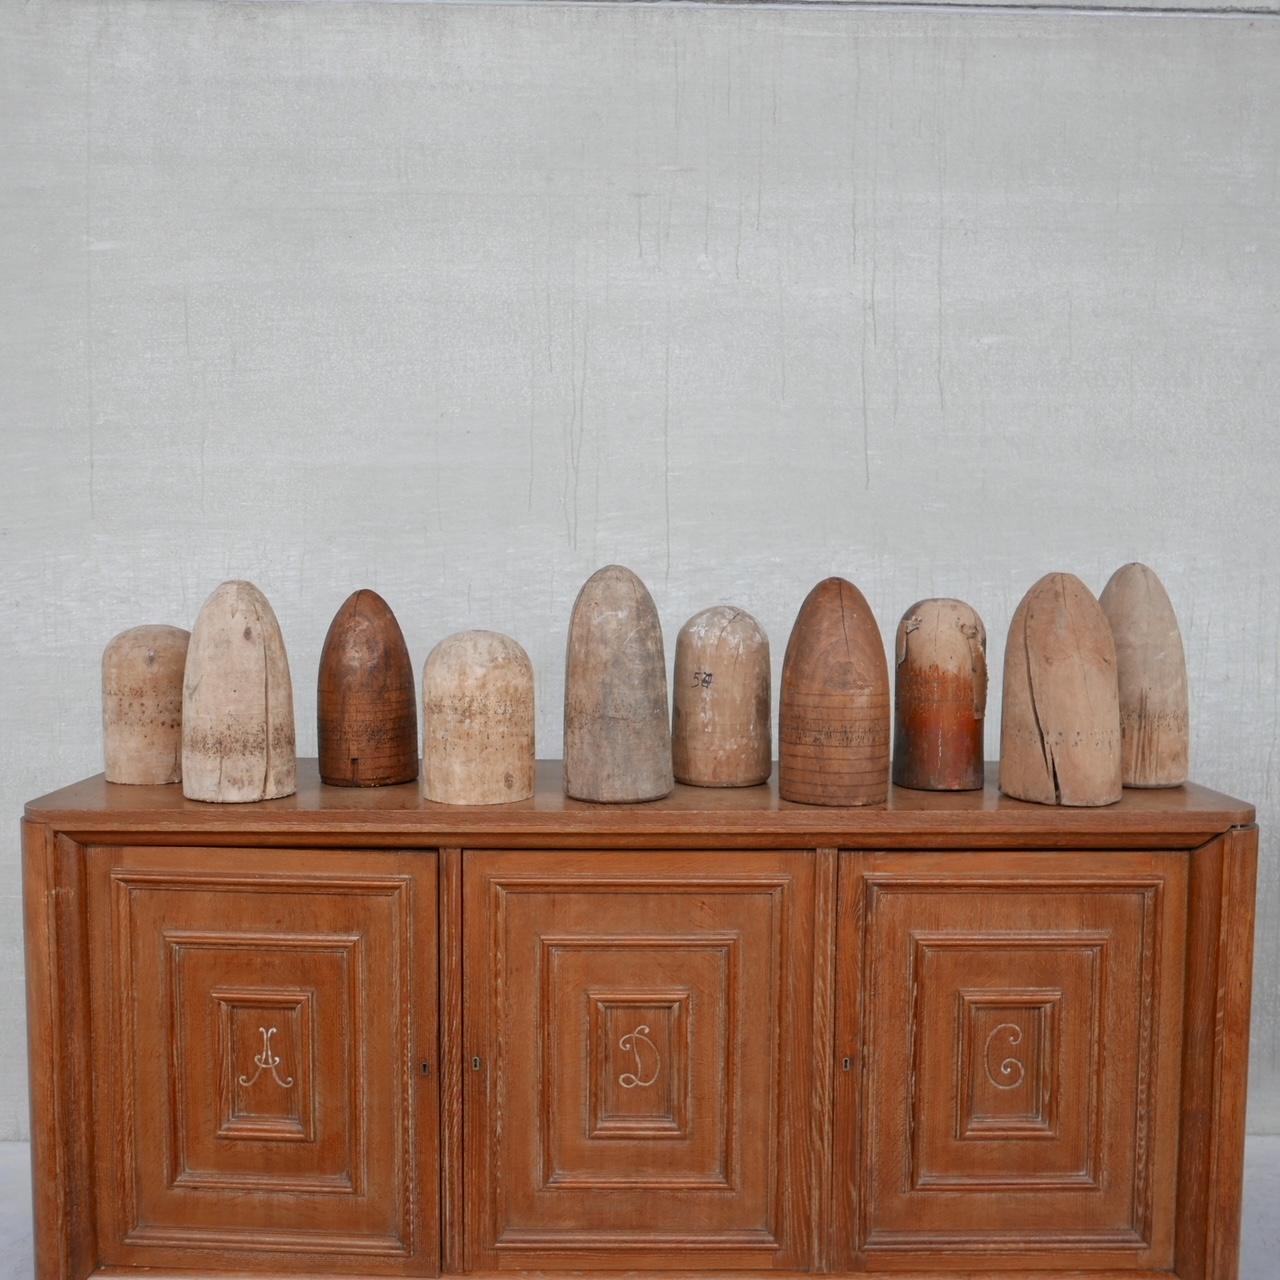 French Wooden Decorative Millinery Moulds 10